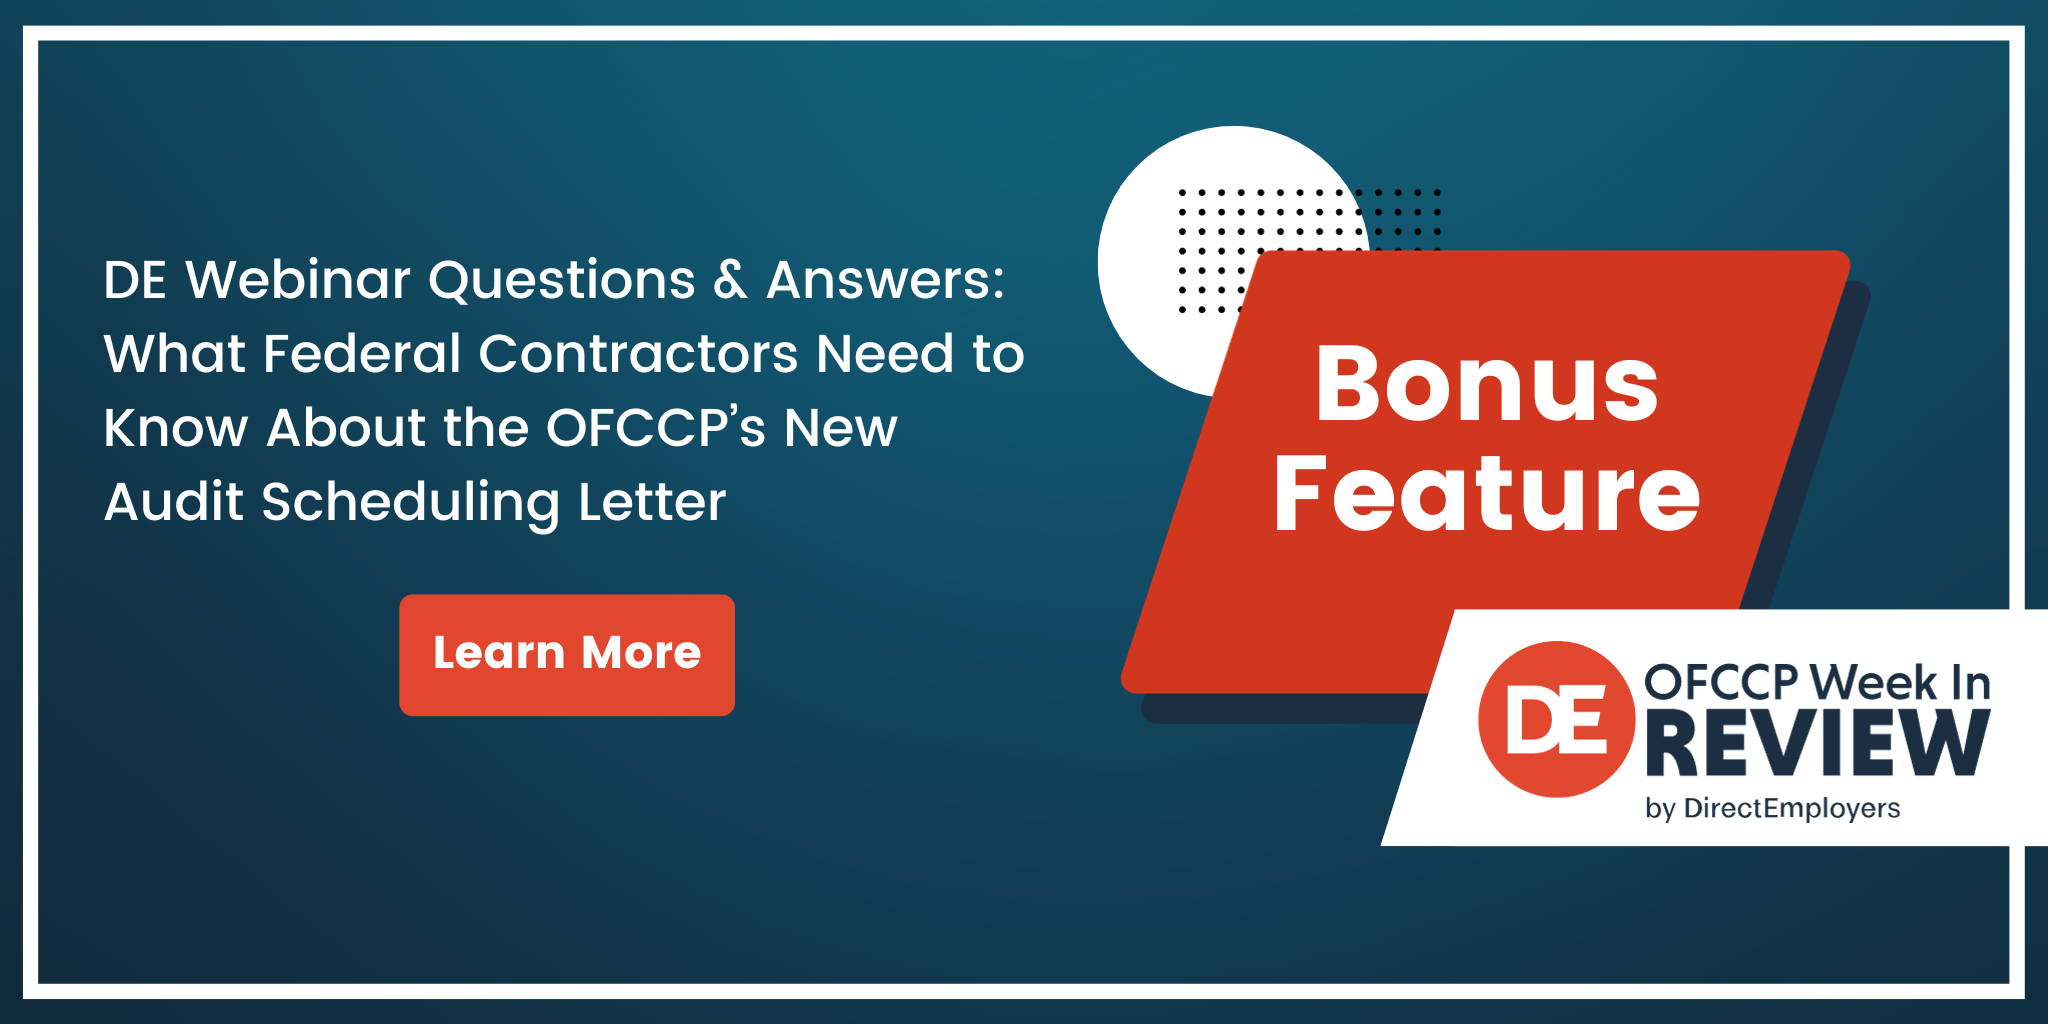 OFCCP Week In Review Bonus Feature | DE Webinar Questions & Answers: What Federal Contractors Need to Know About the OFCCP’s New Audit Scheduling Letter